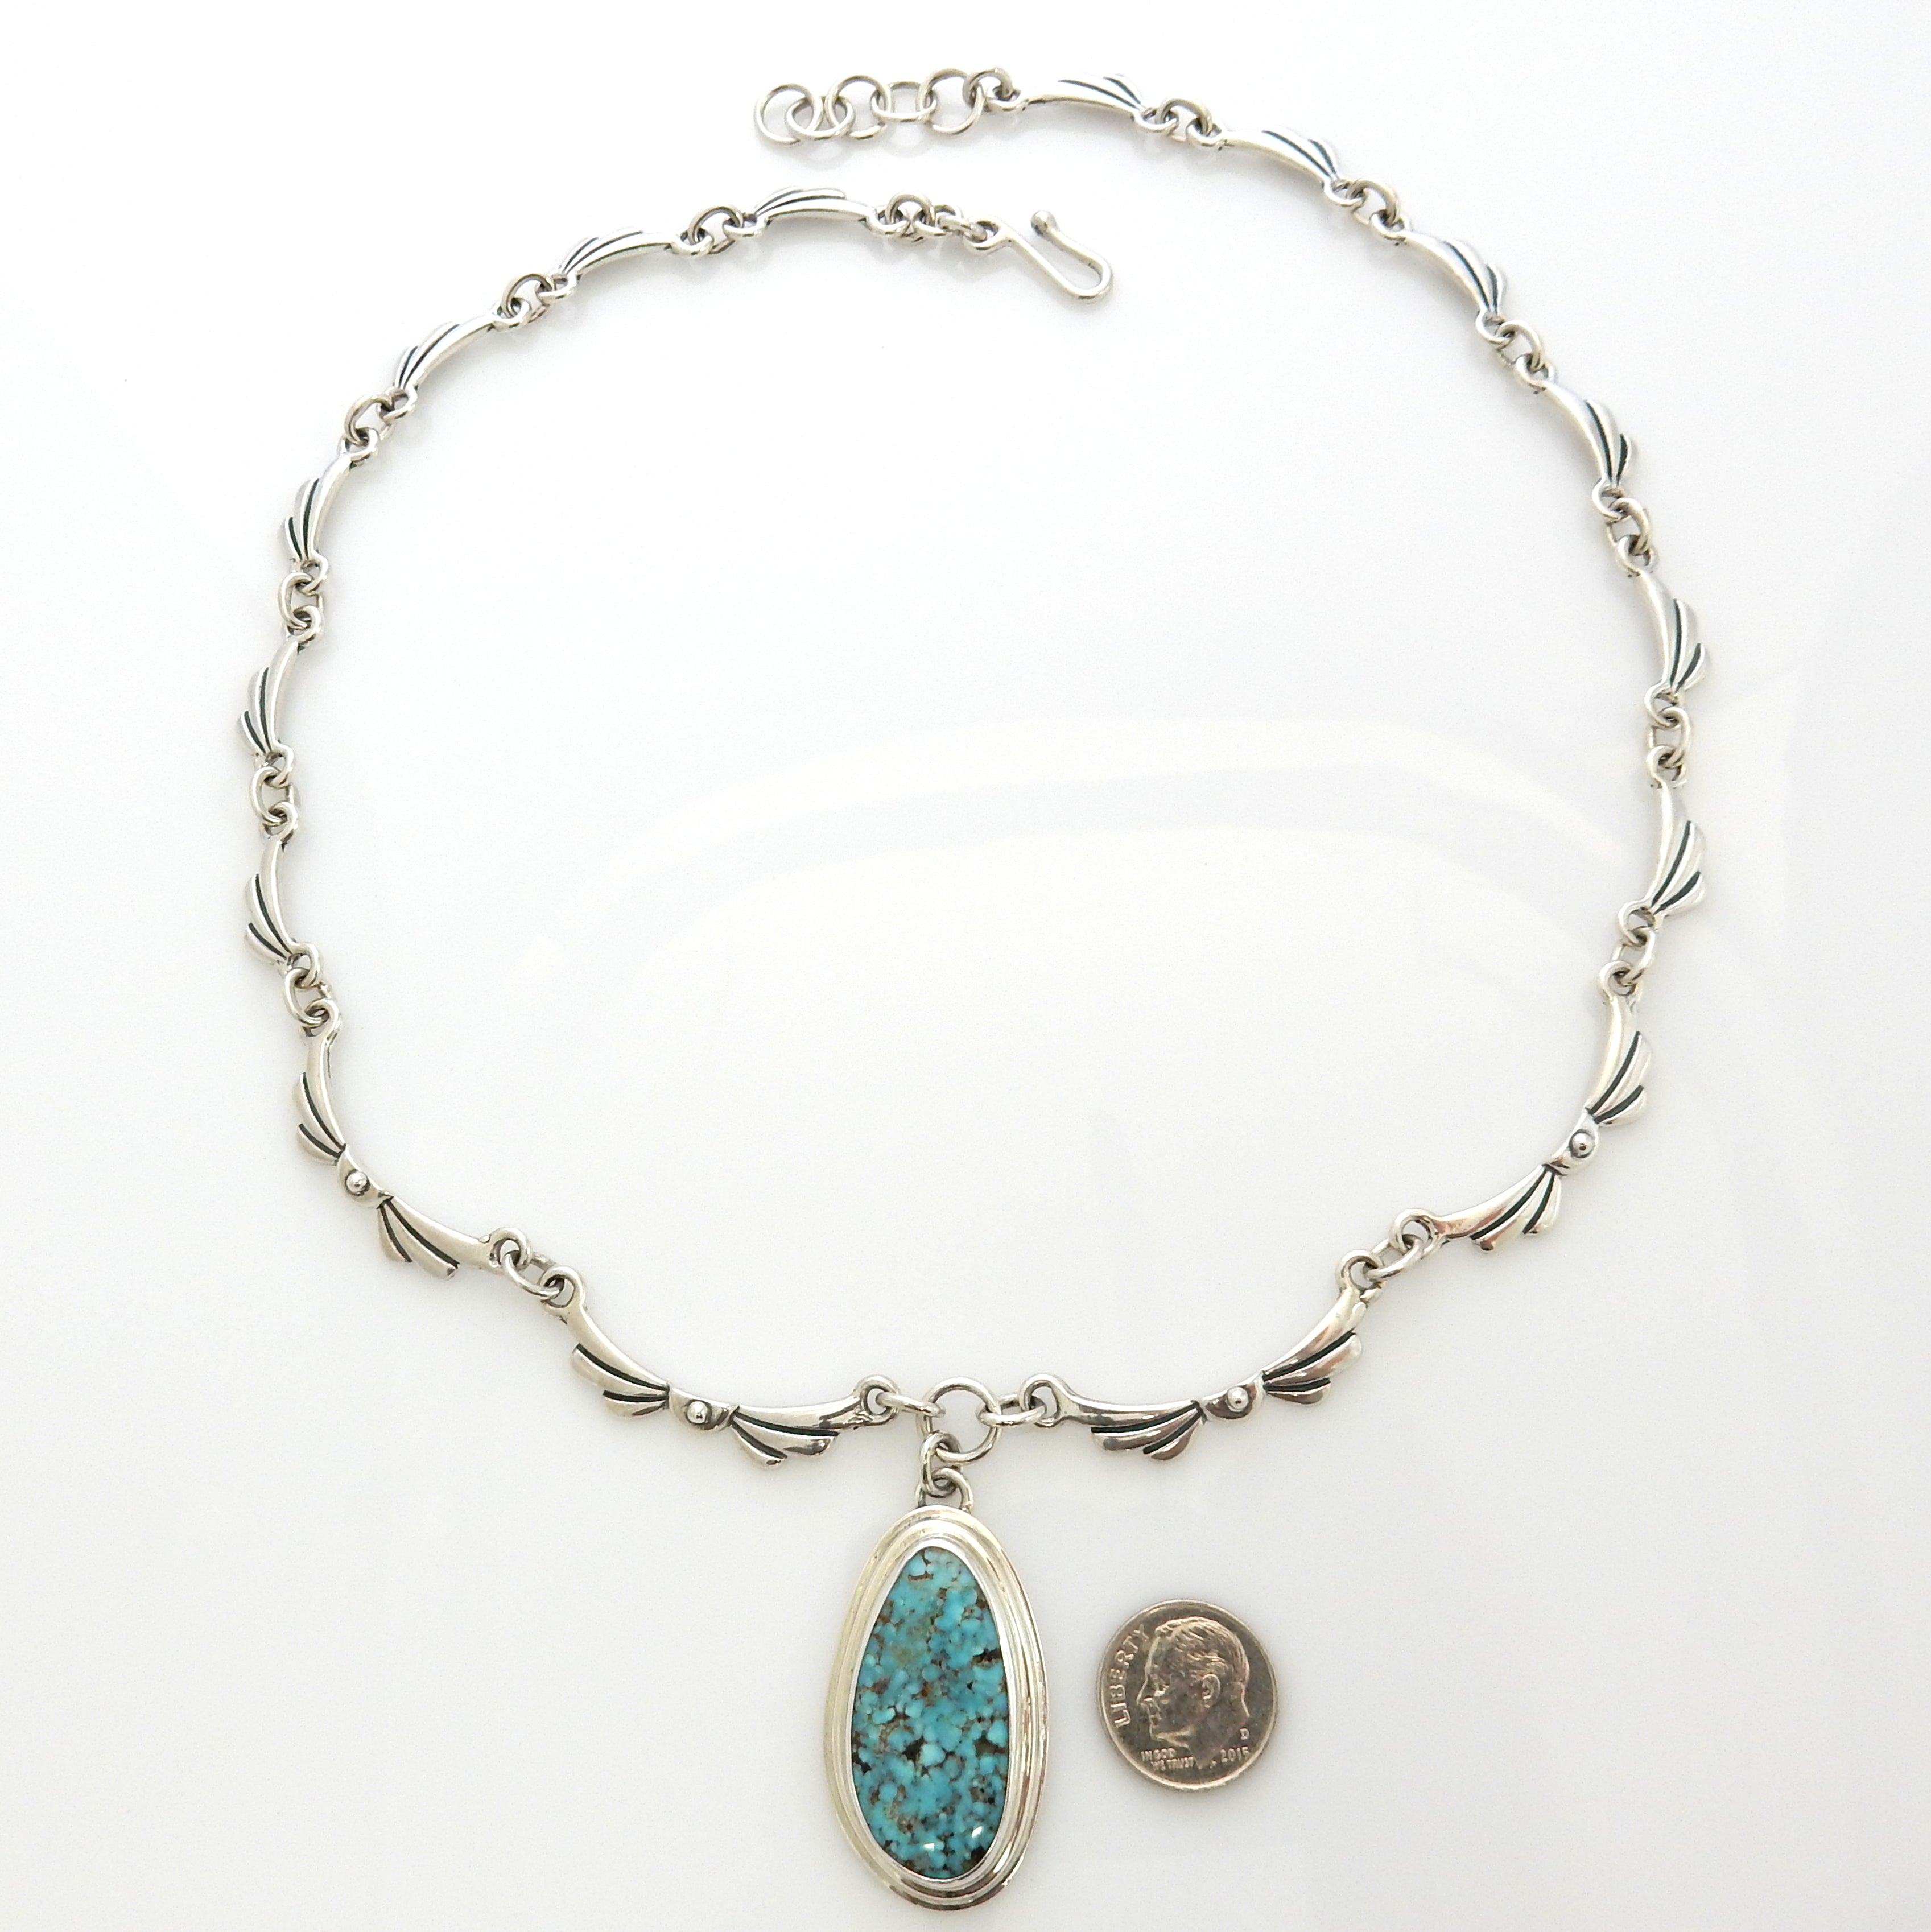 Beautiful Adjustable 20.5" Inch Handmade Sterling Silver Blue Natural Turquoise Necklace